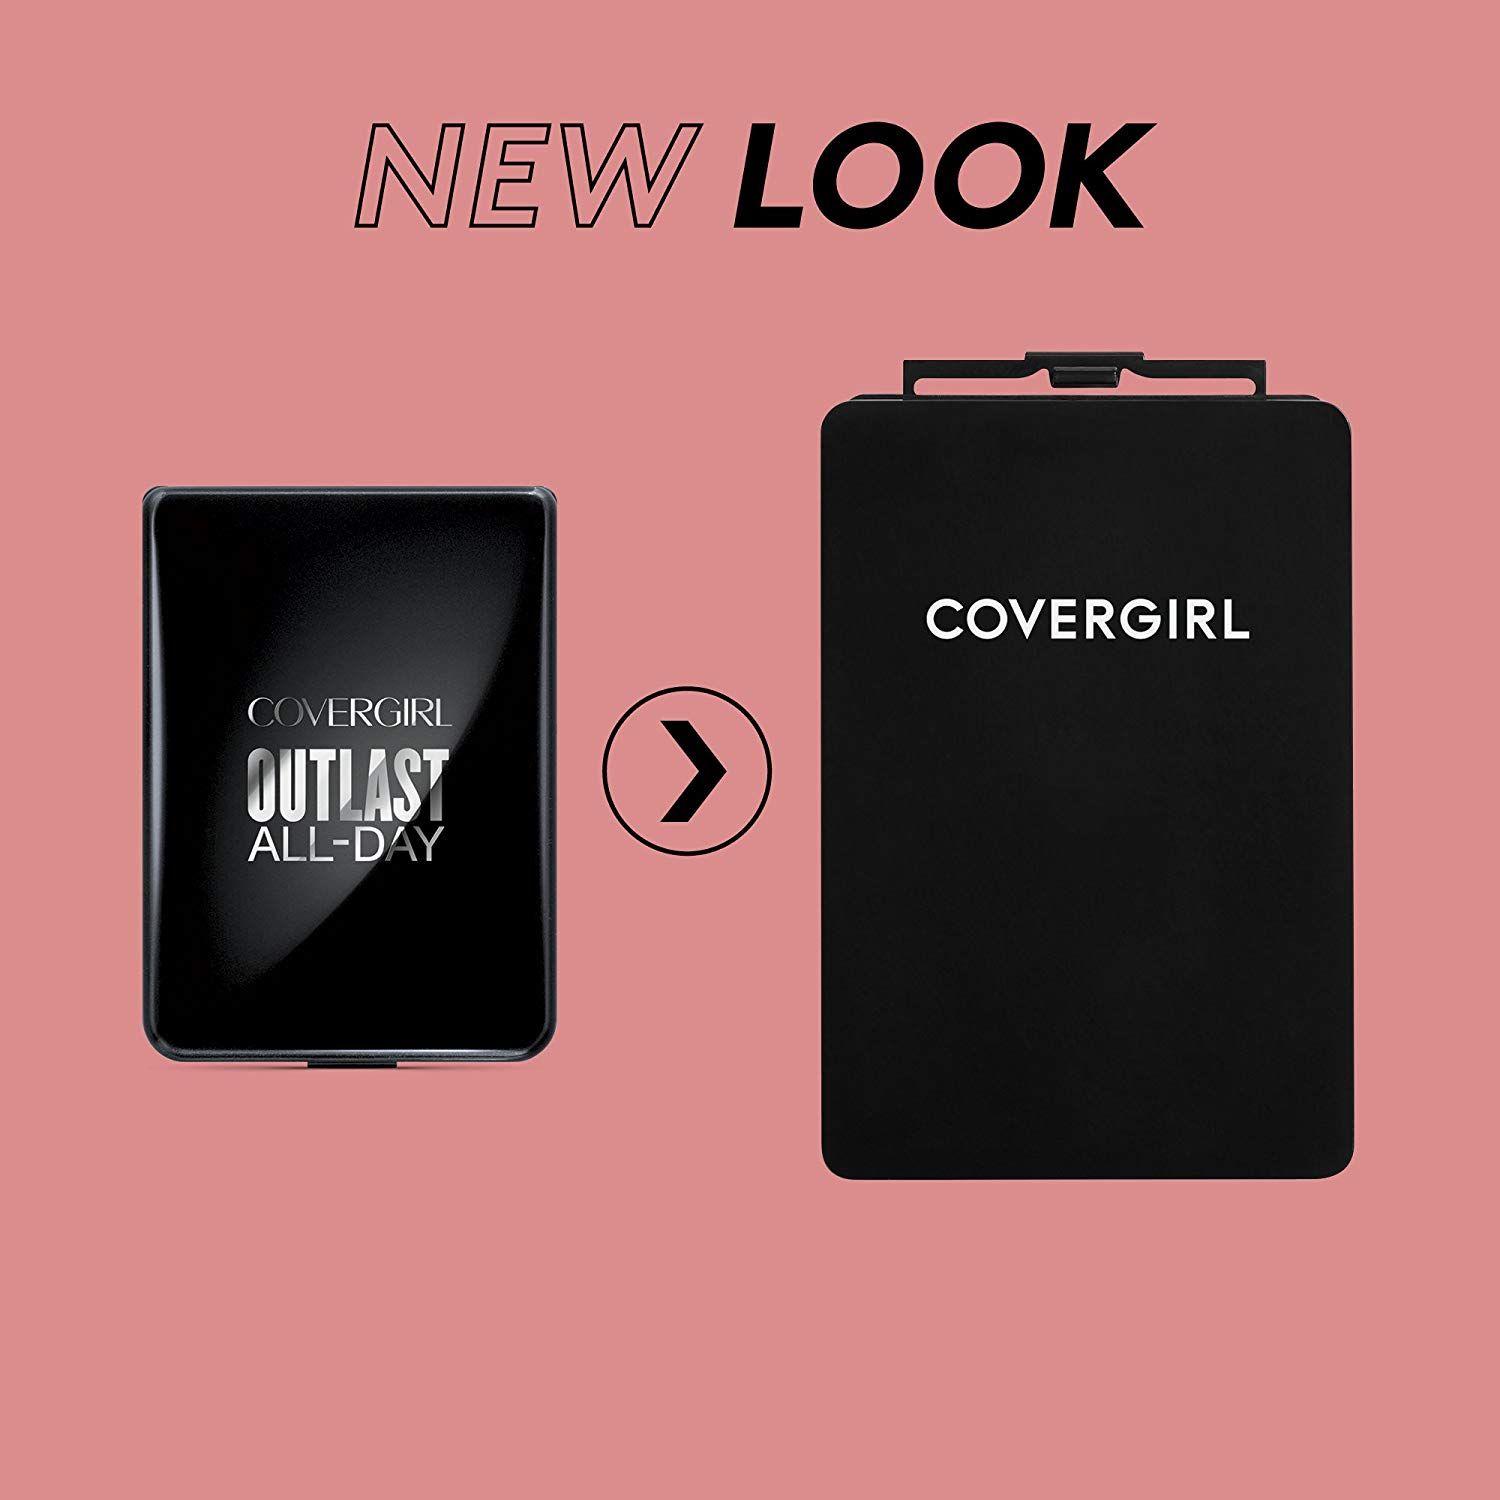 Covergirl Logo - Amazon.com : COVERGIRL Outlast All Day Ultimate Finish 3 In 1